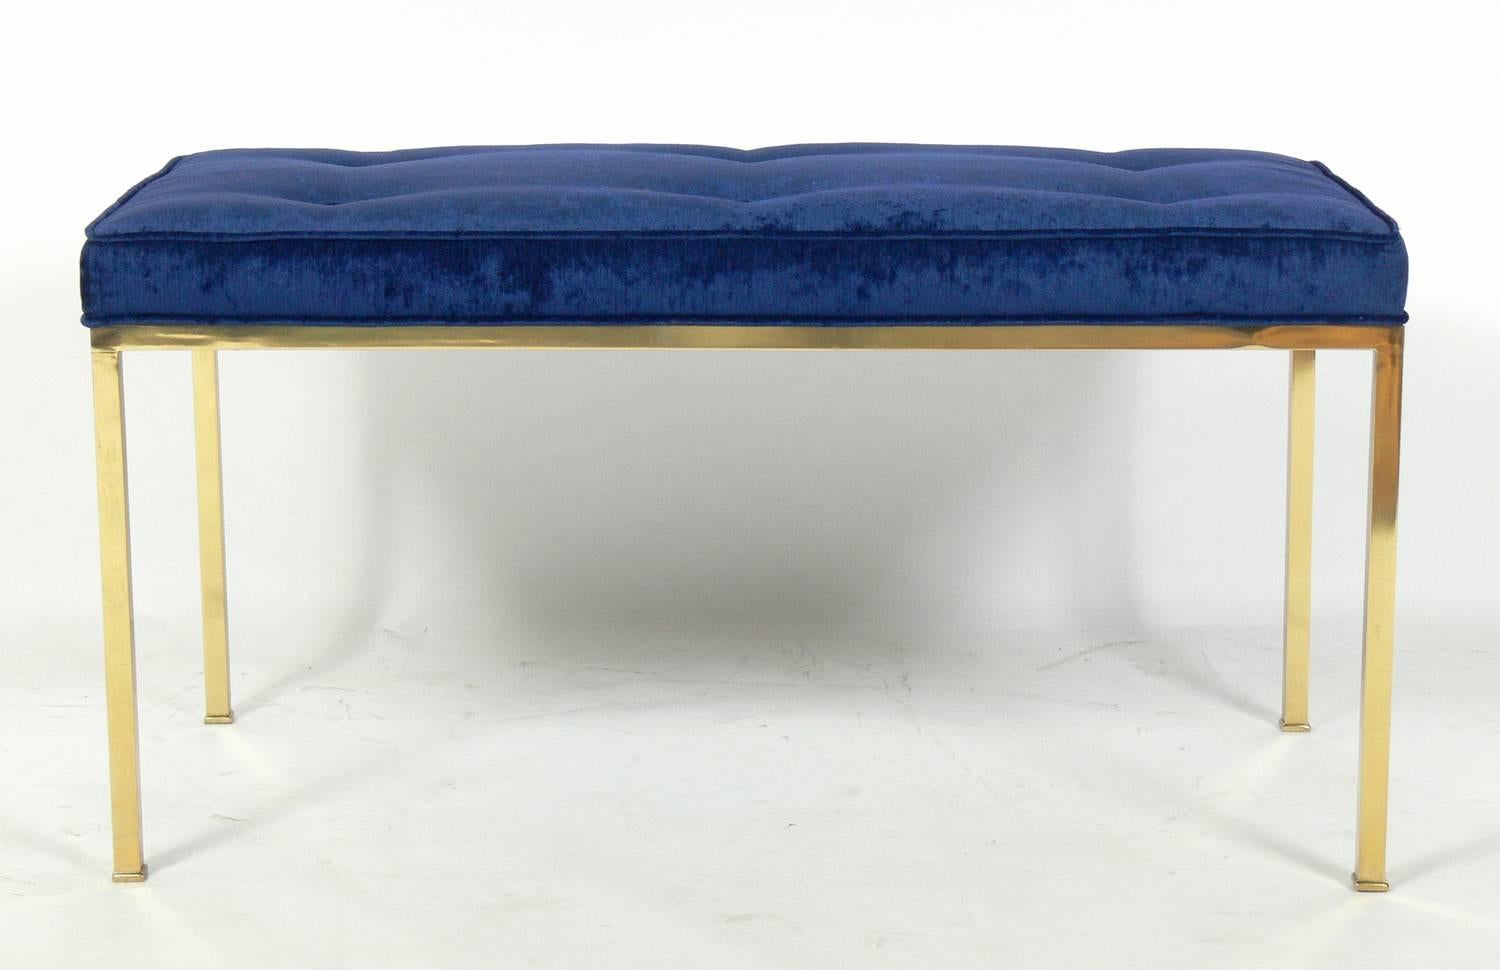 Mid-Century Modern Clean Lined Brass Bench in the Manner of Edward Wormley for Dunbar